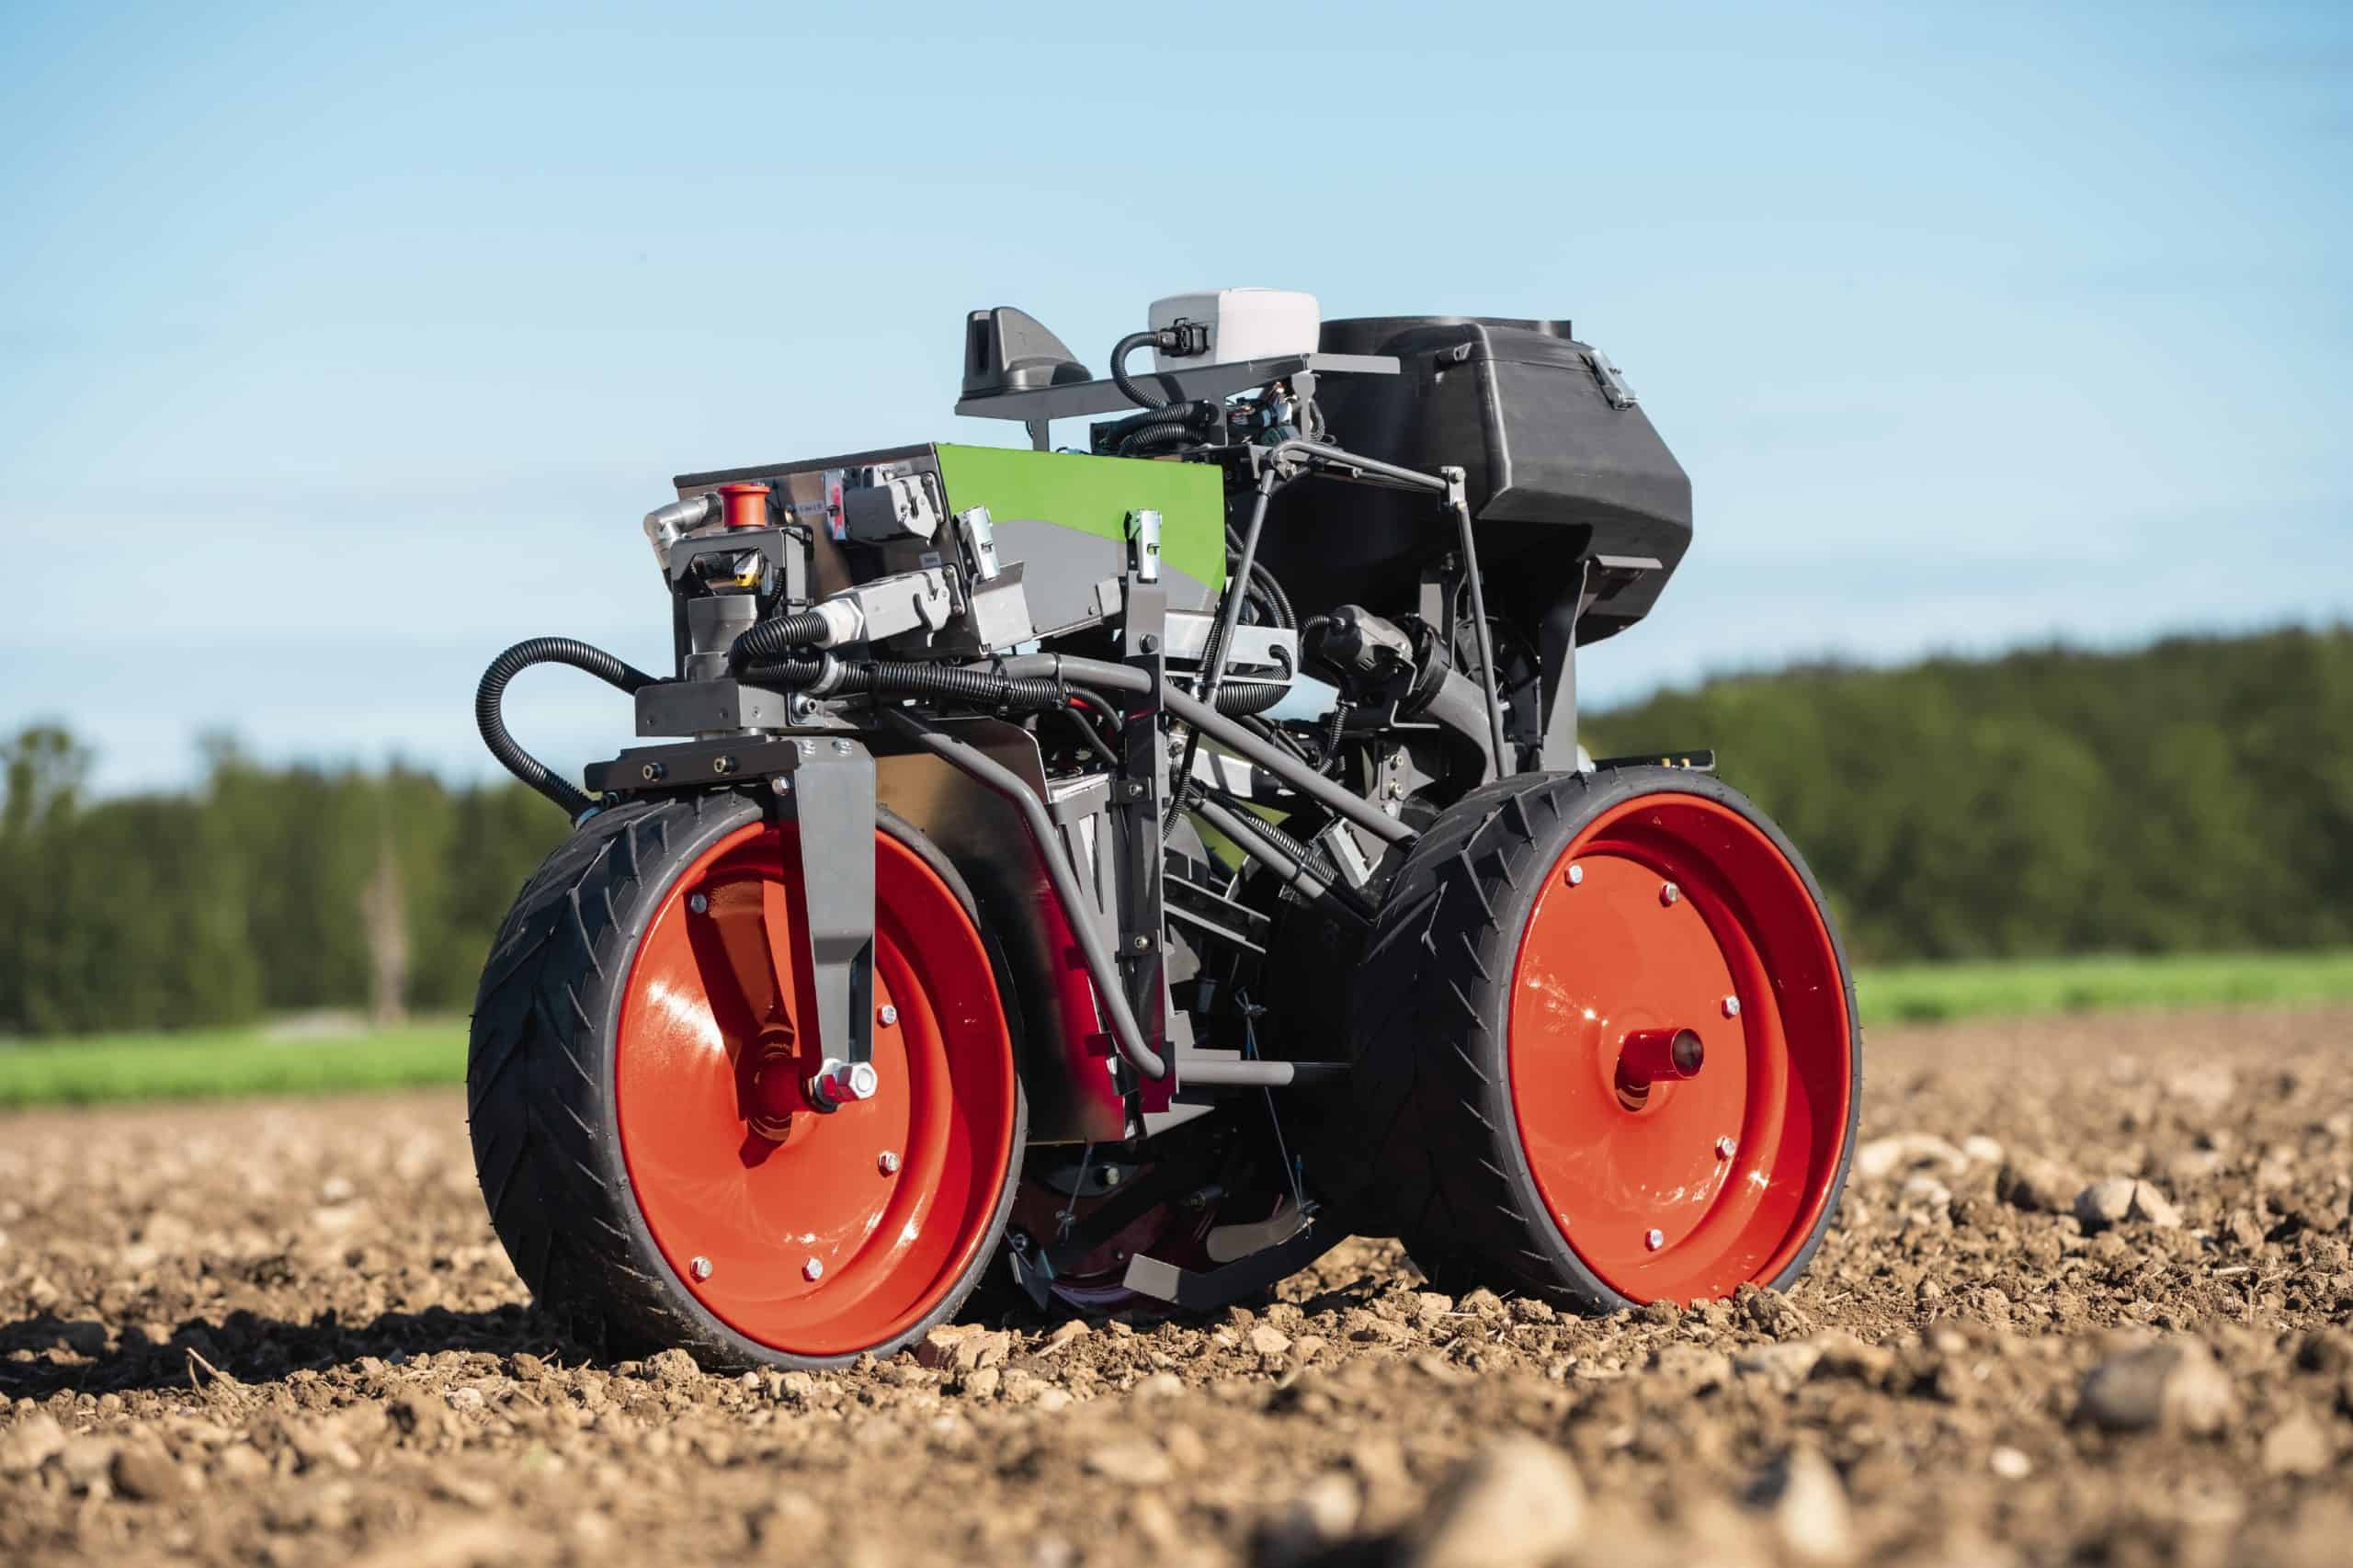 Latest generation of seed sowing robots